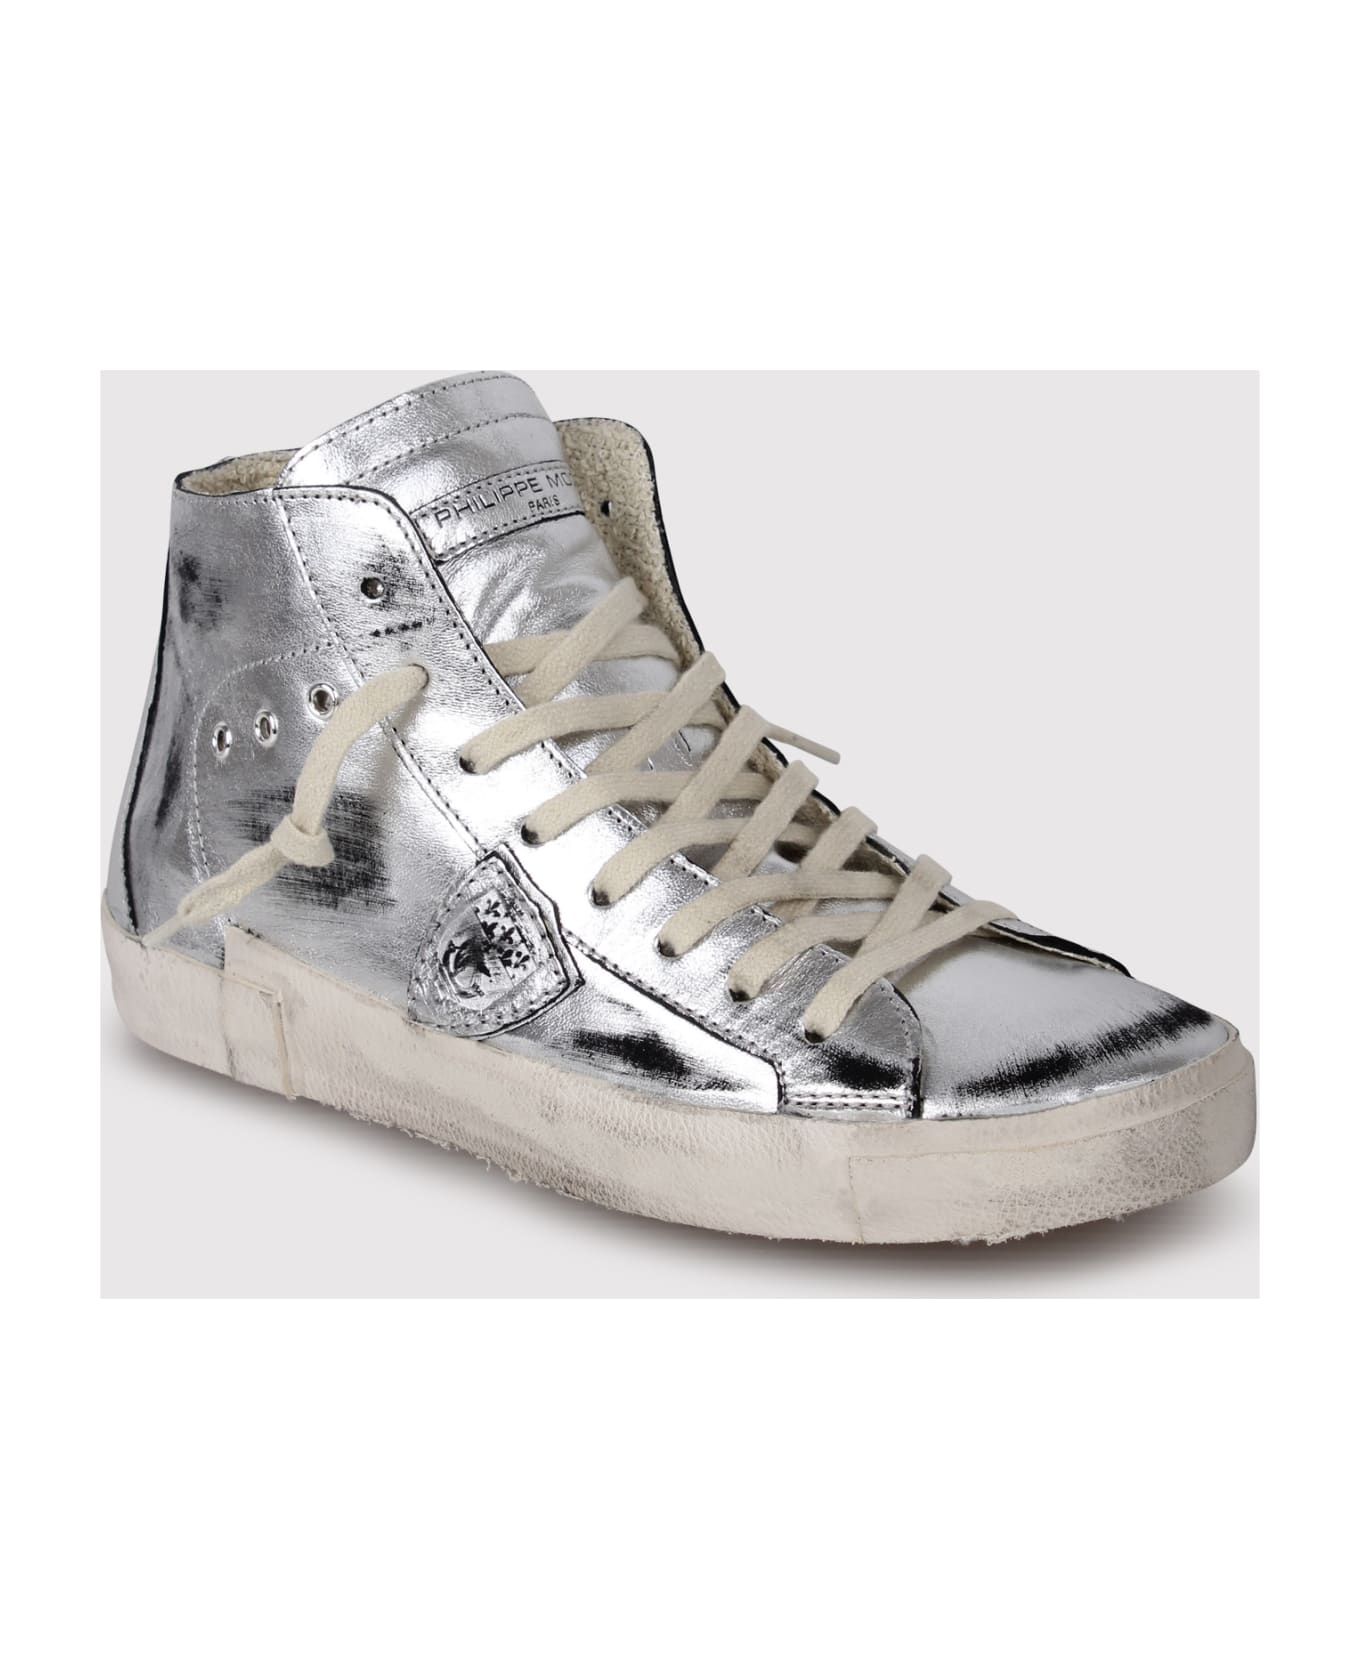 Philippe Model Prsx High-top Sneakers スニーカー